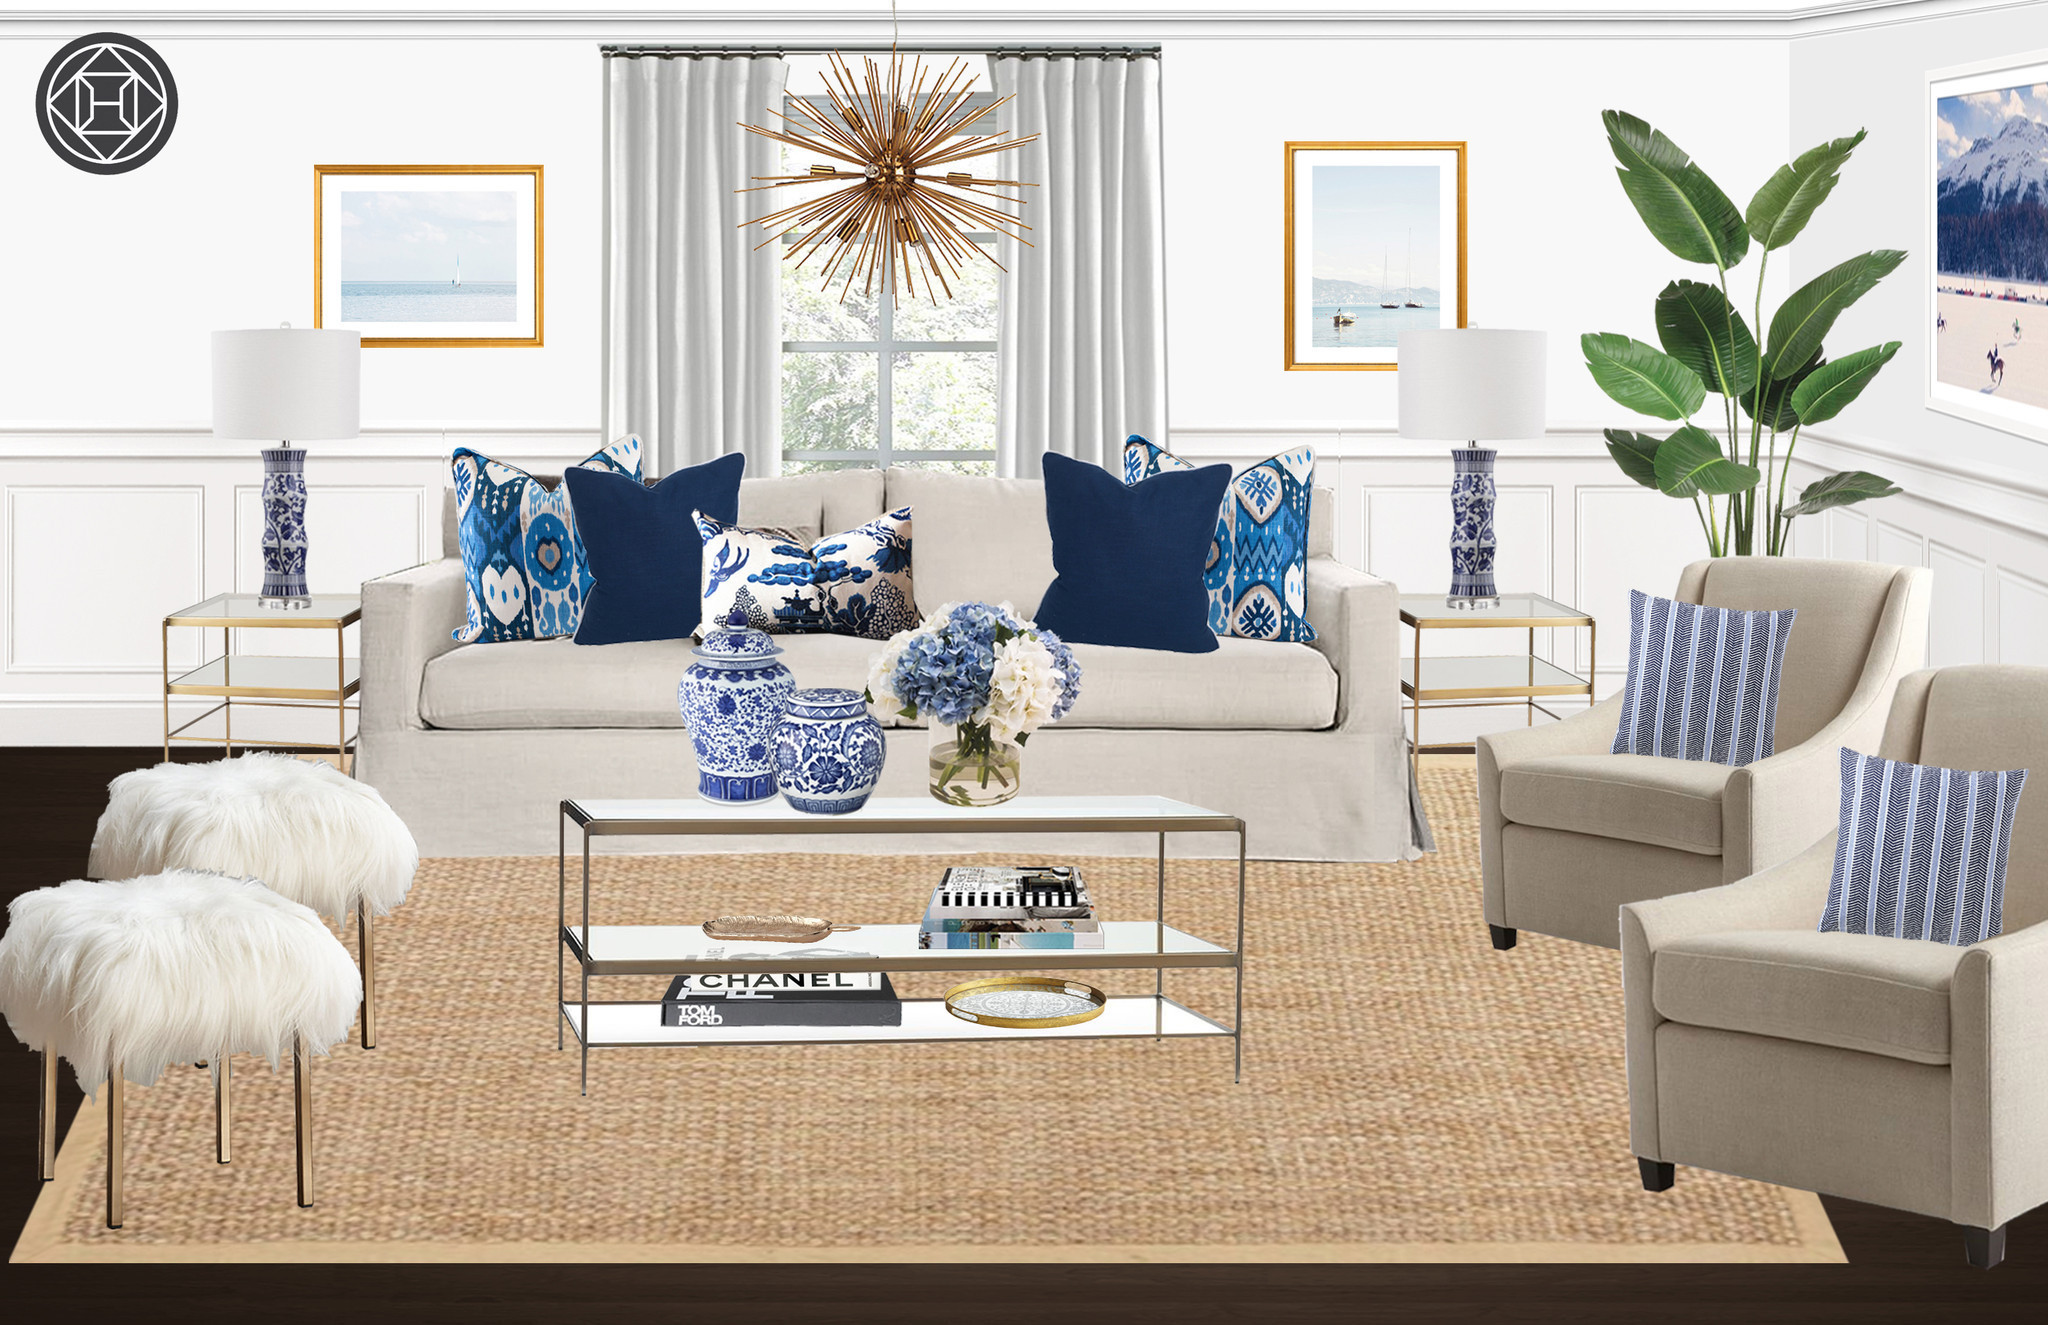 One reason to hire an interior designer online? The price